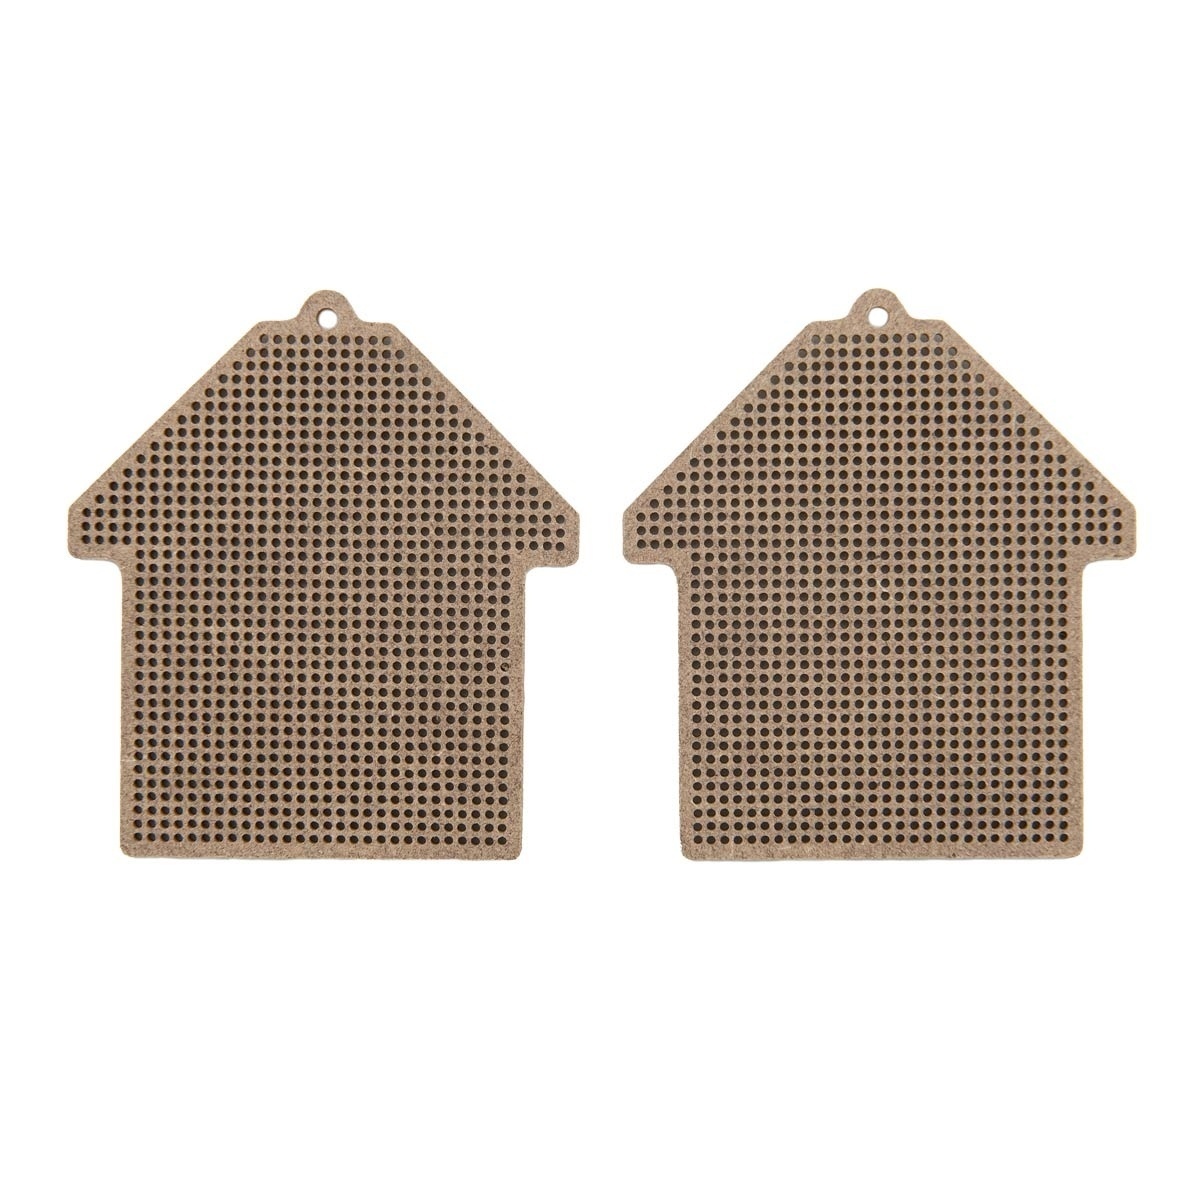 House Perforated Canvas Set фото 1